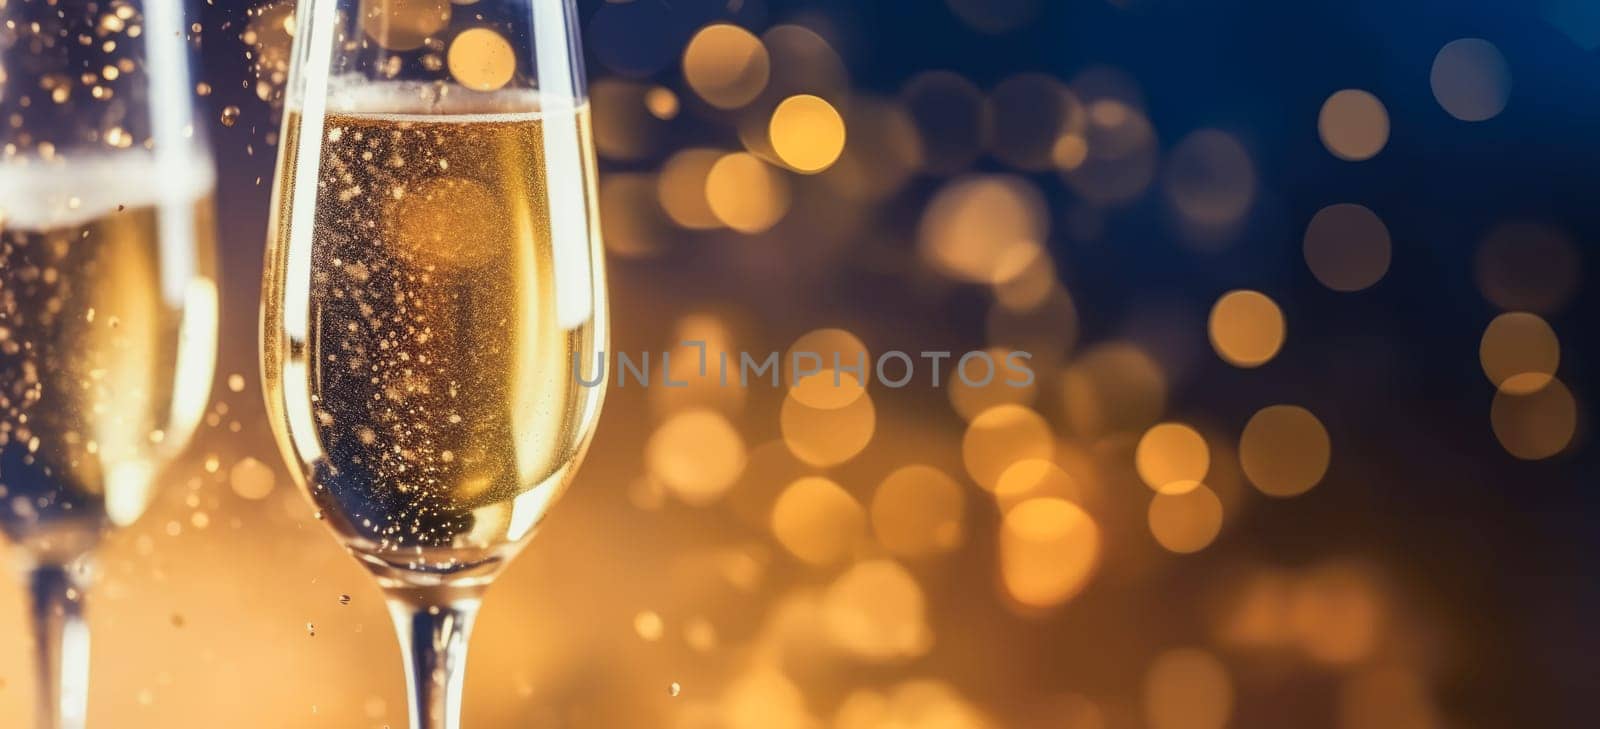 New Year and champagne background comeliness by biancoblue